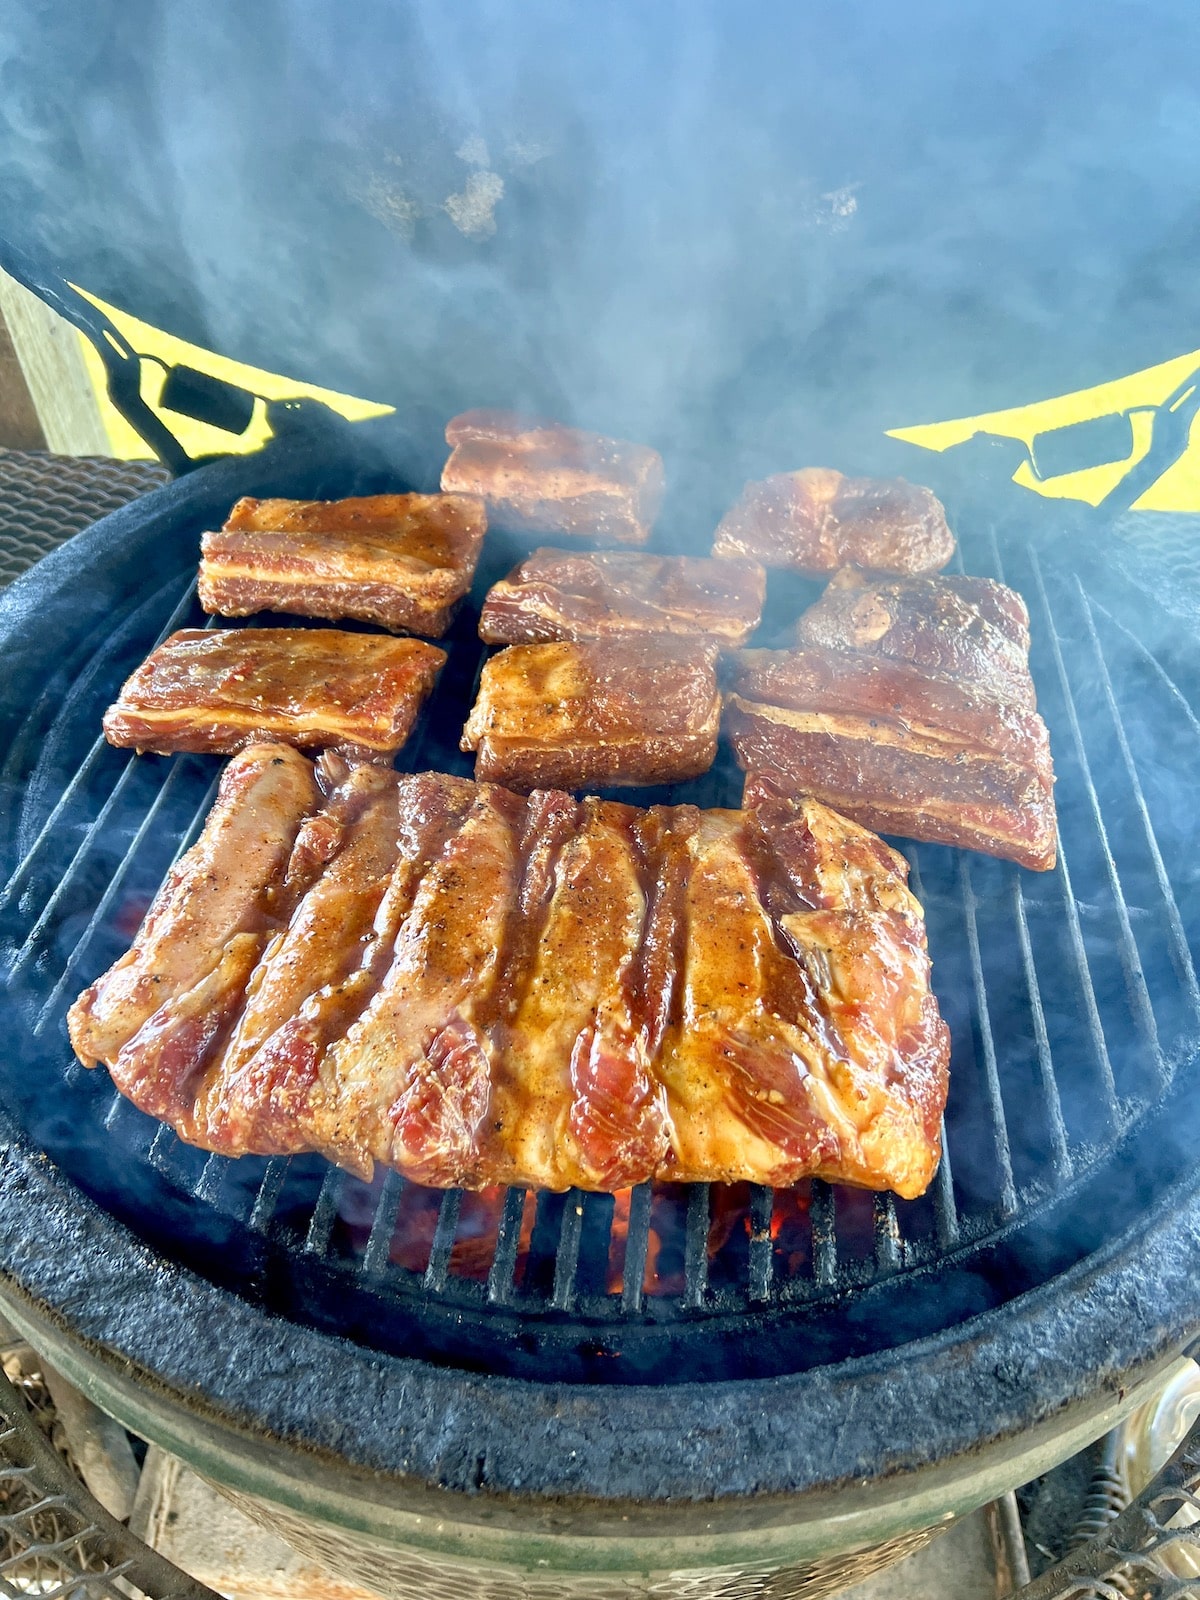 Beef ribs on a grill.